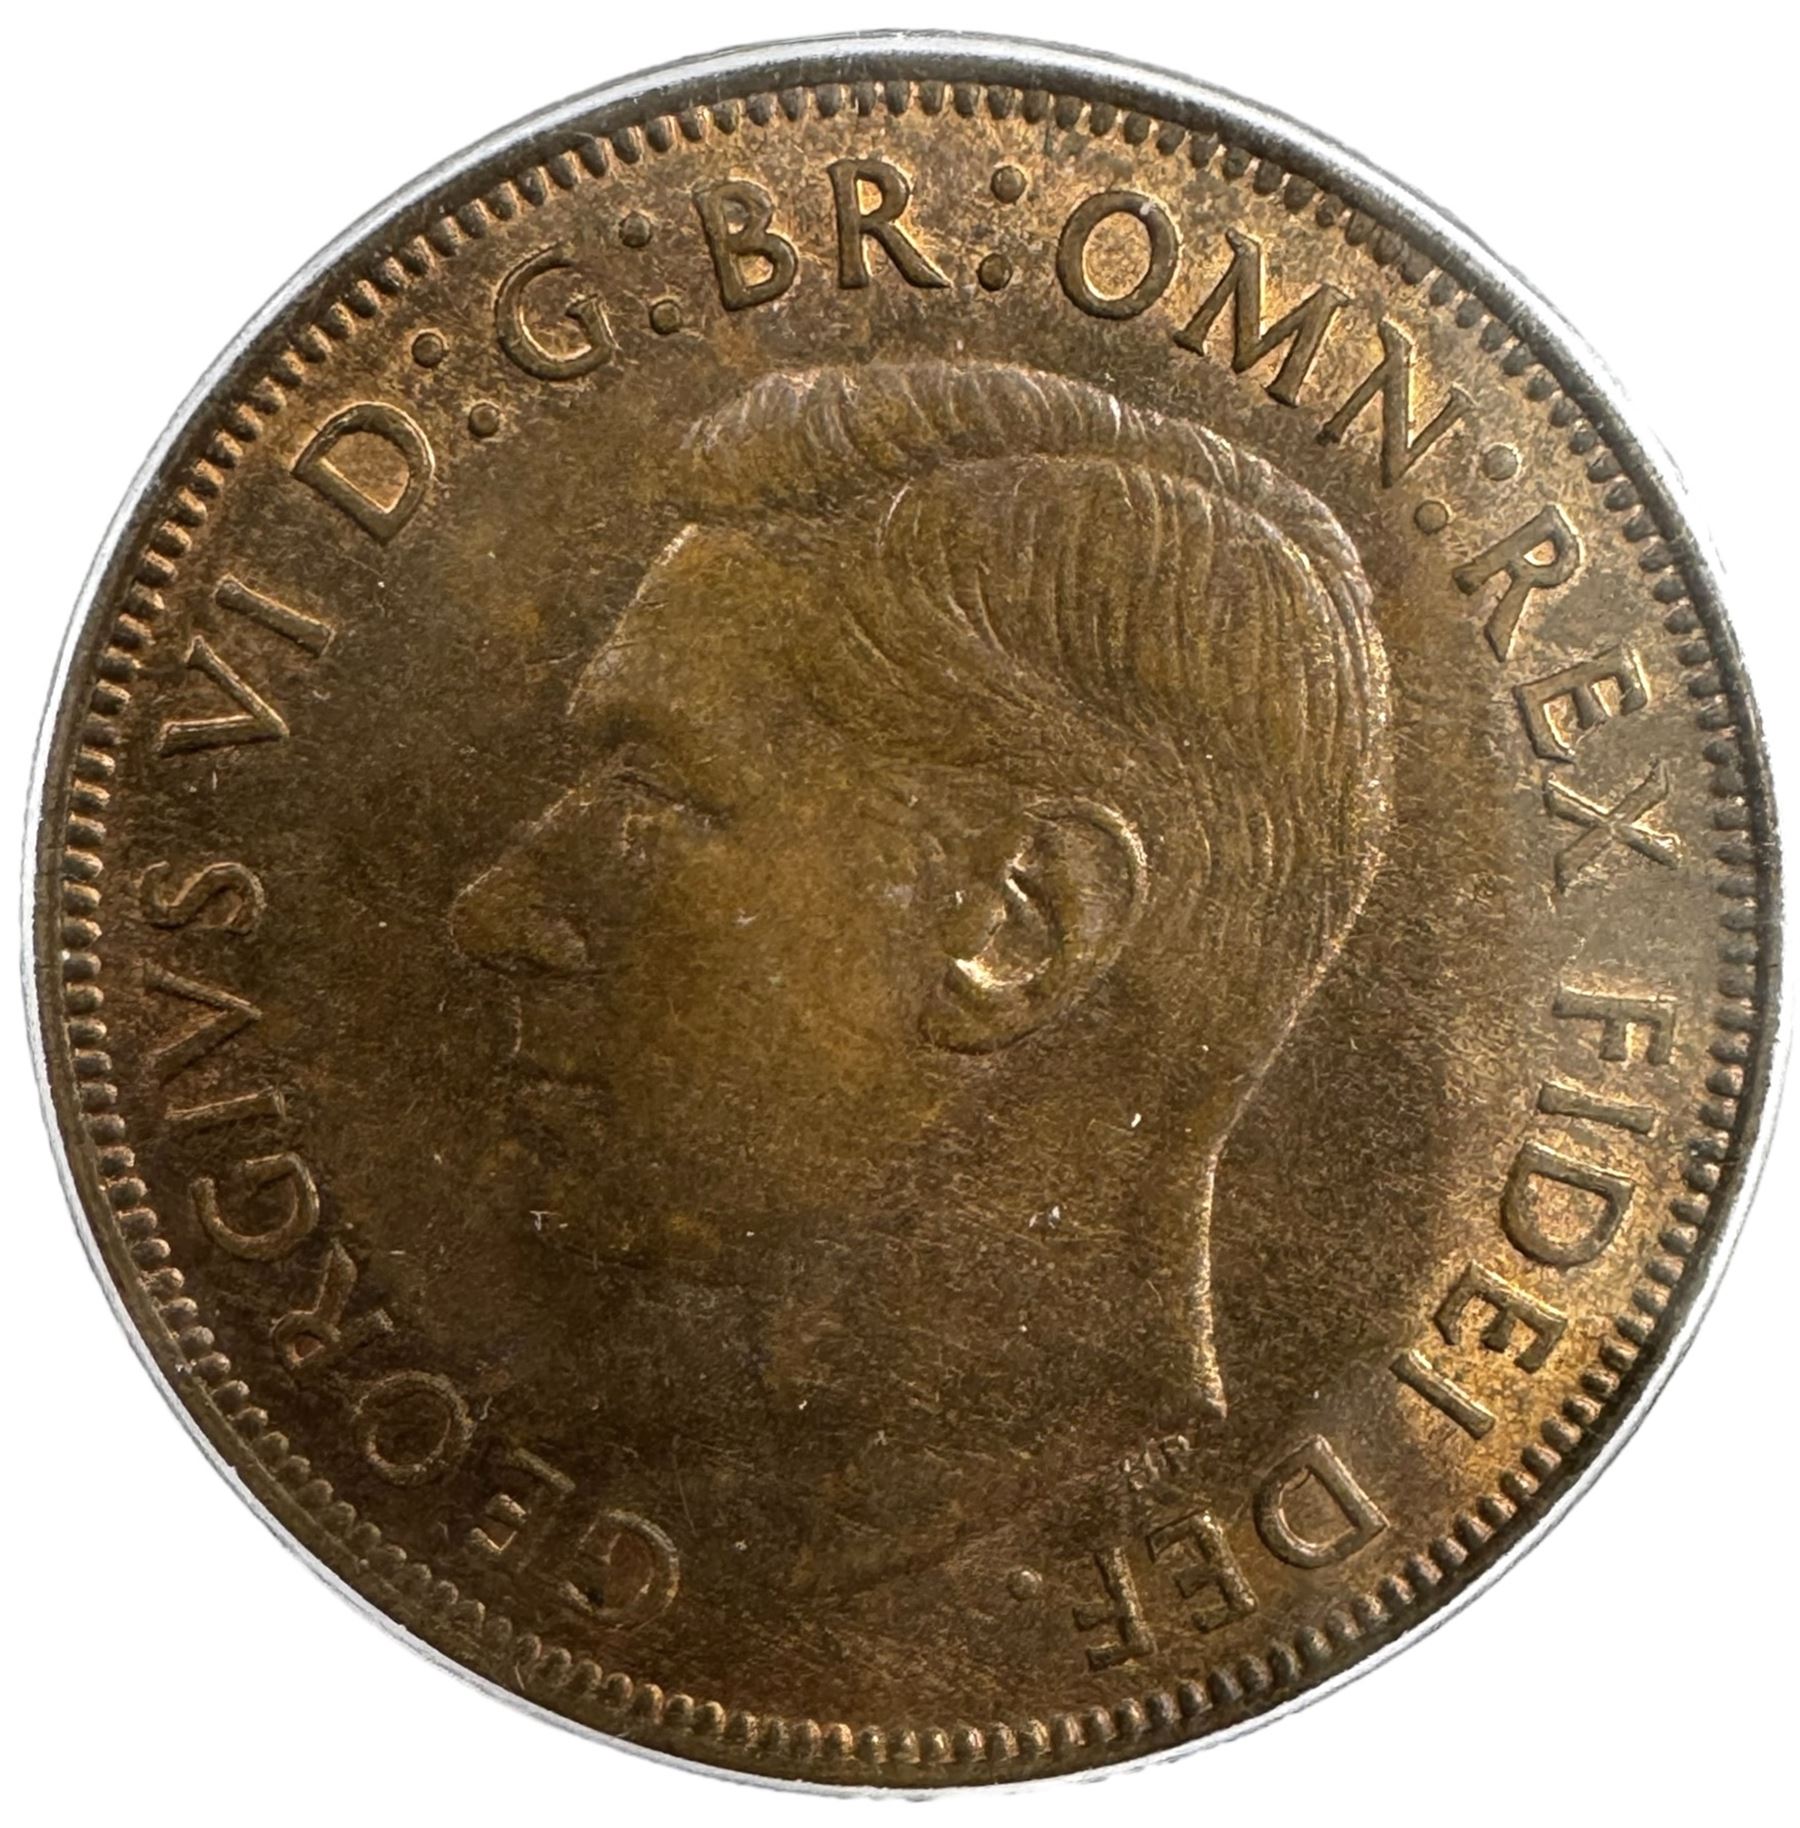 King George VI 1951 one penny coin